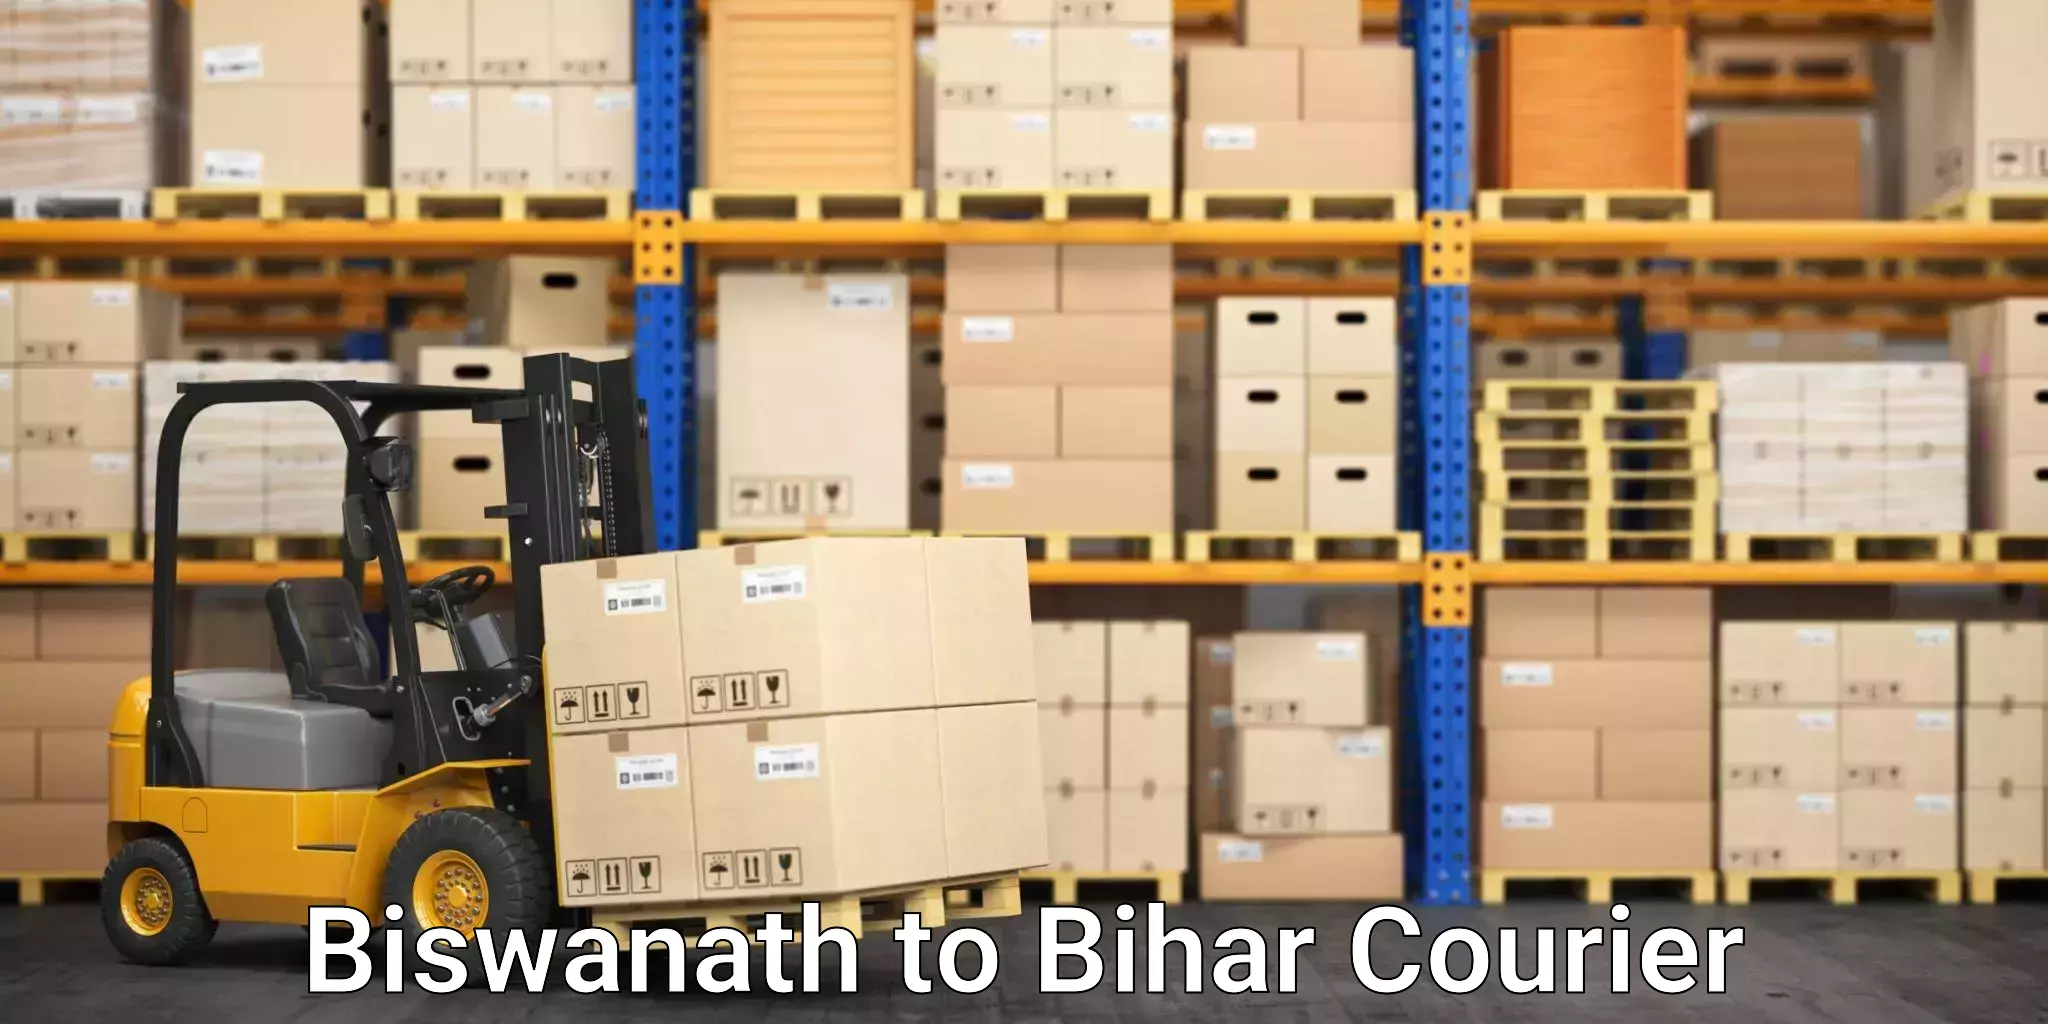 Tech-enabled shipping Biswanath to Sheikhpura